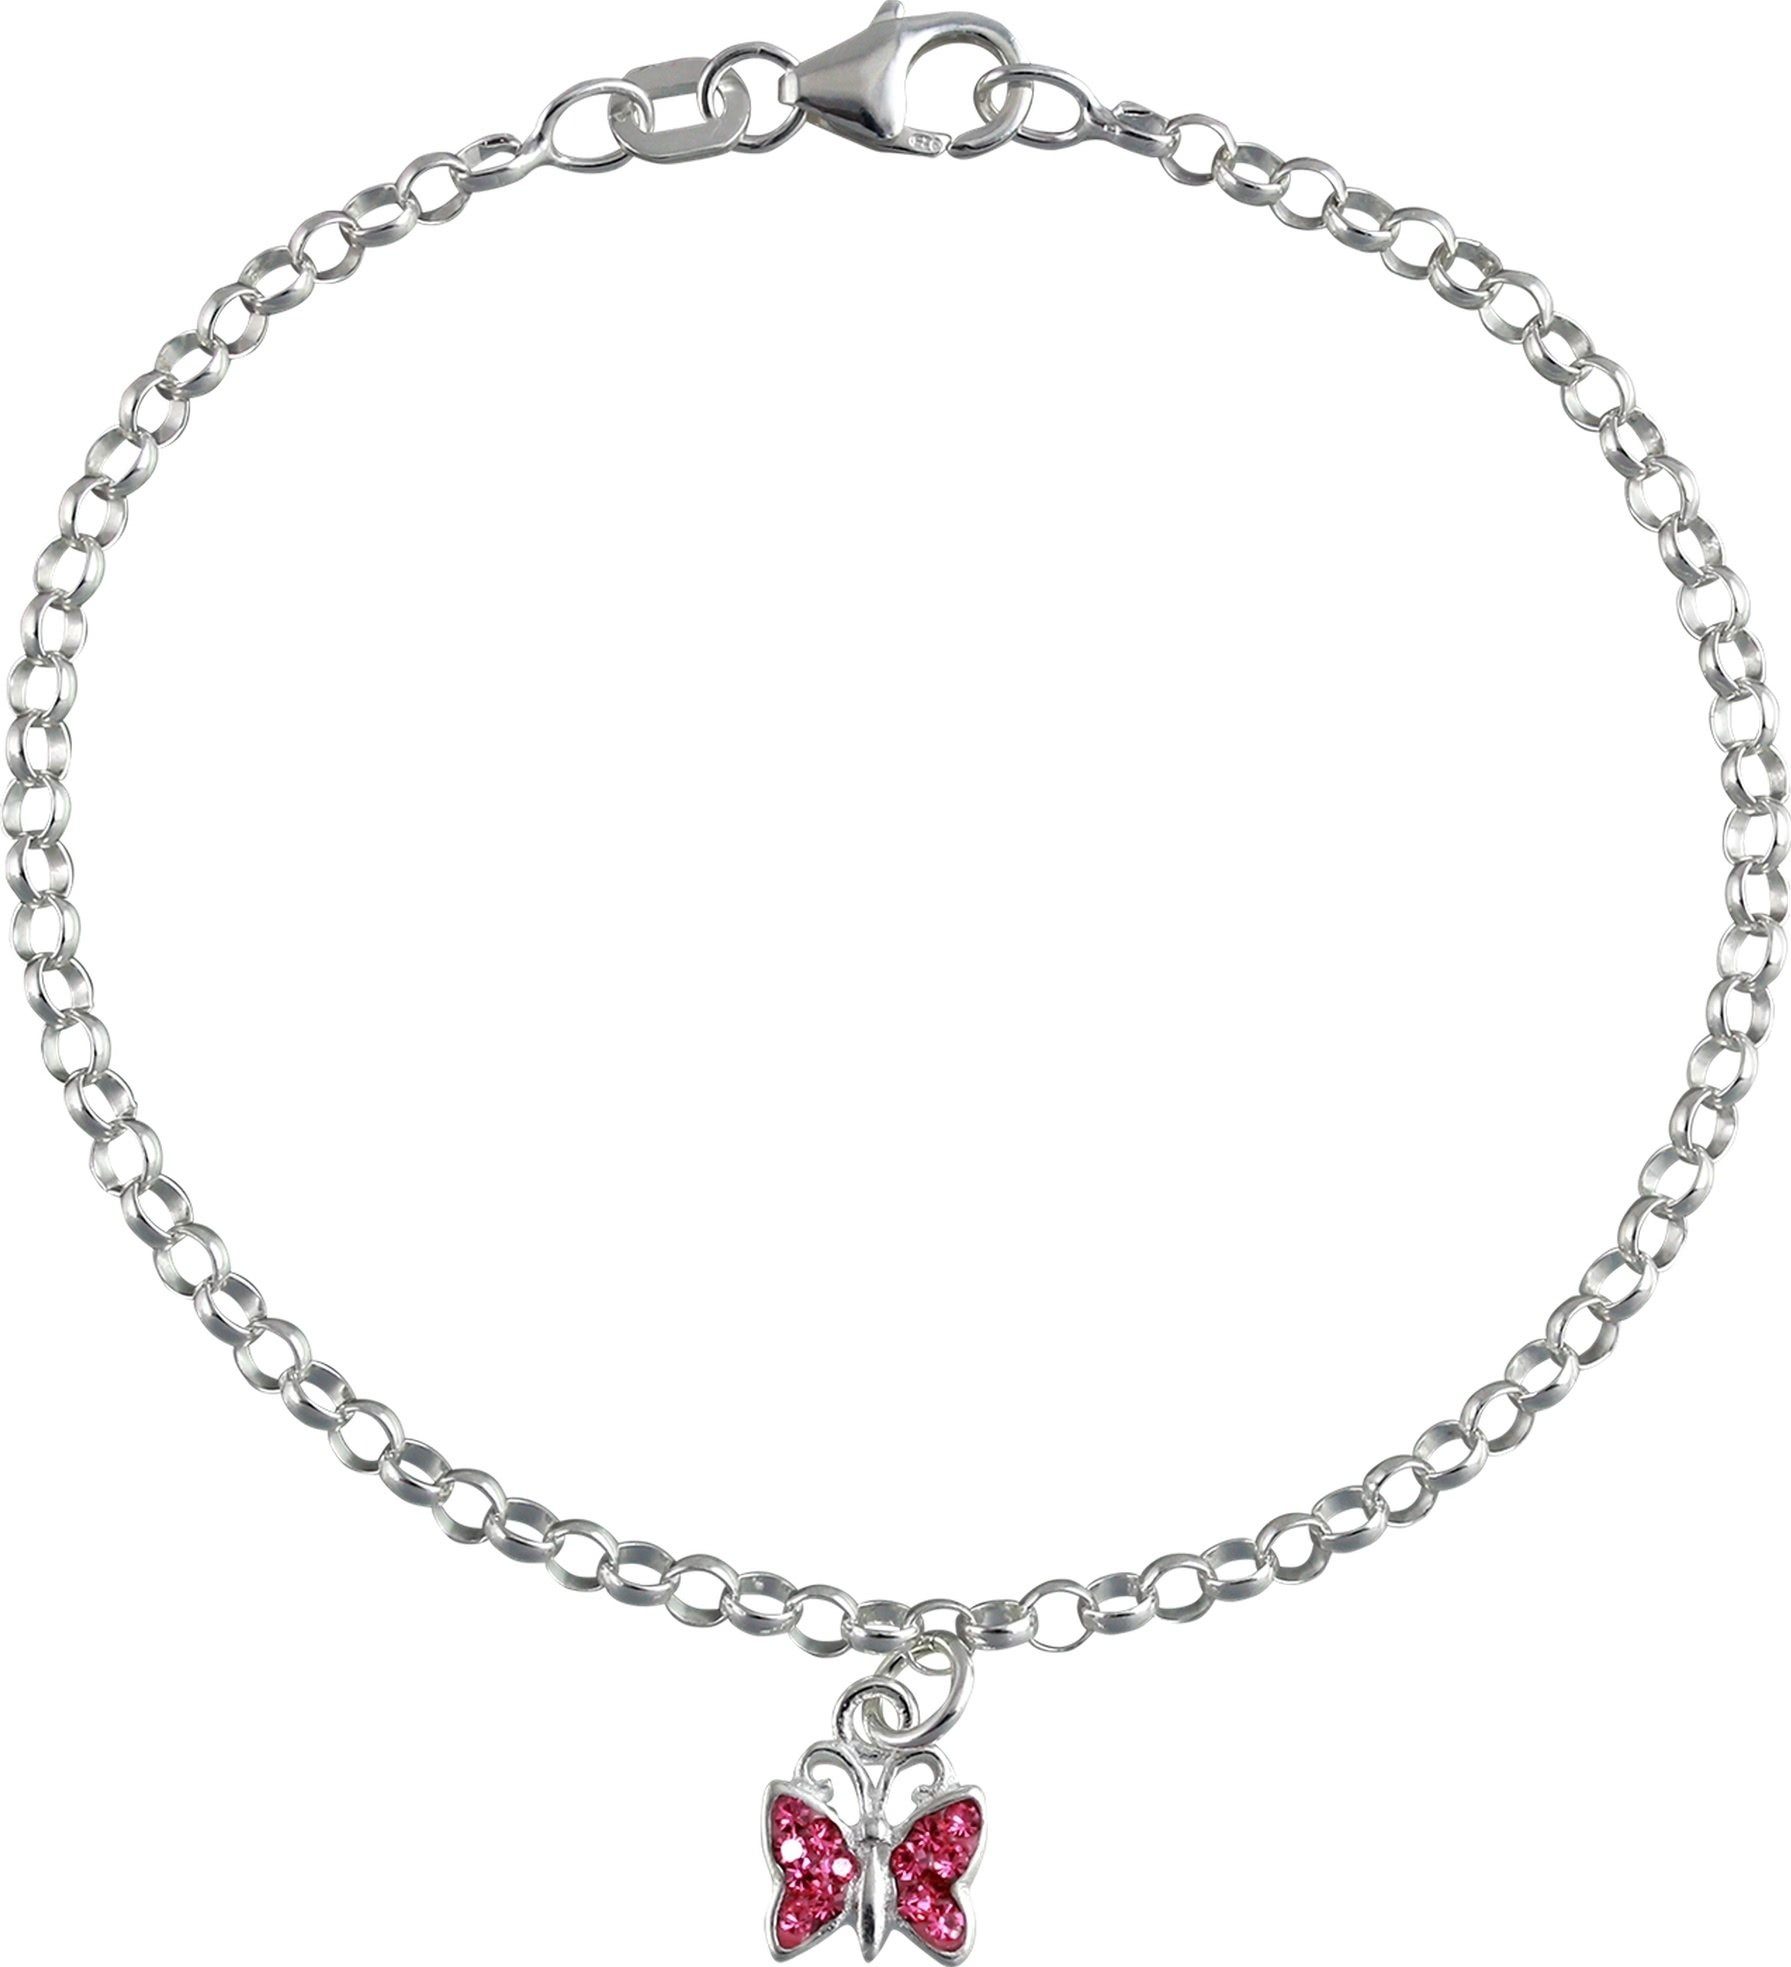 SilberDream Silberarmband SilberDream (Schmetterling) 16cm, Armband rosa 925 Kinder Silber, (Armband), Armband Schmetterling rosa ca. Farbe